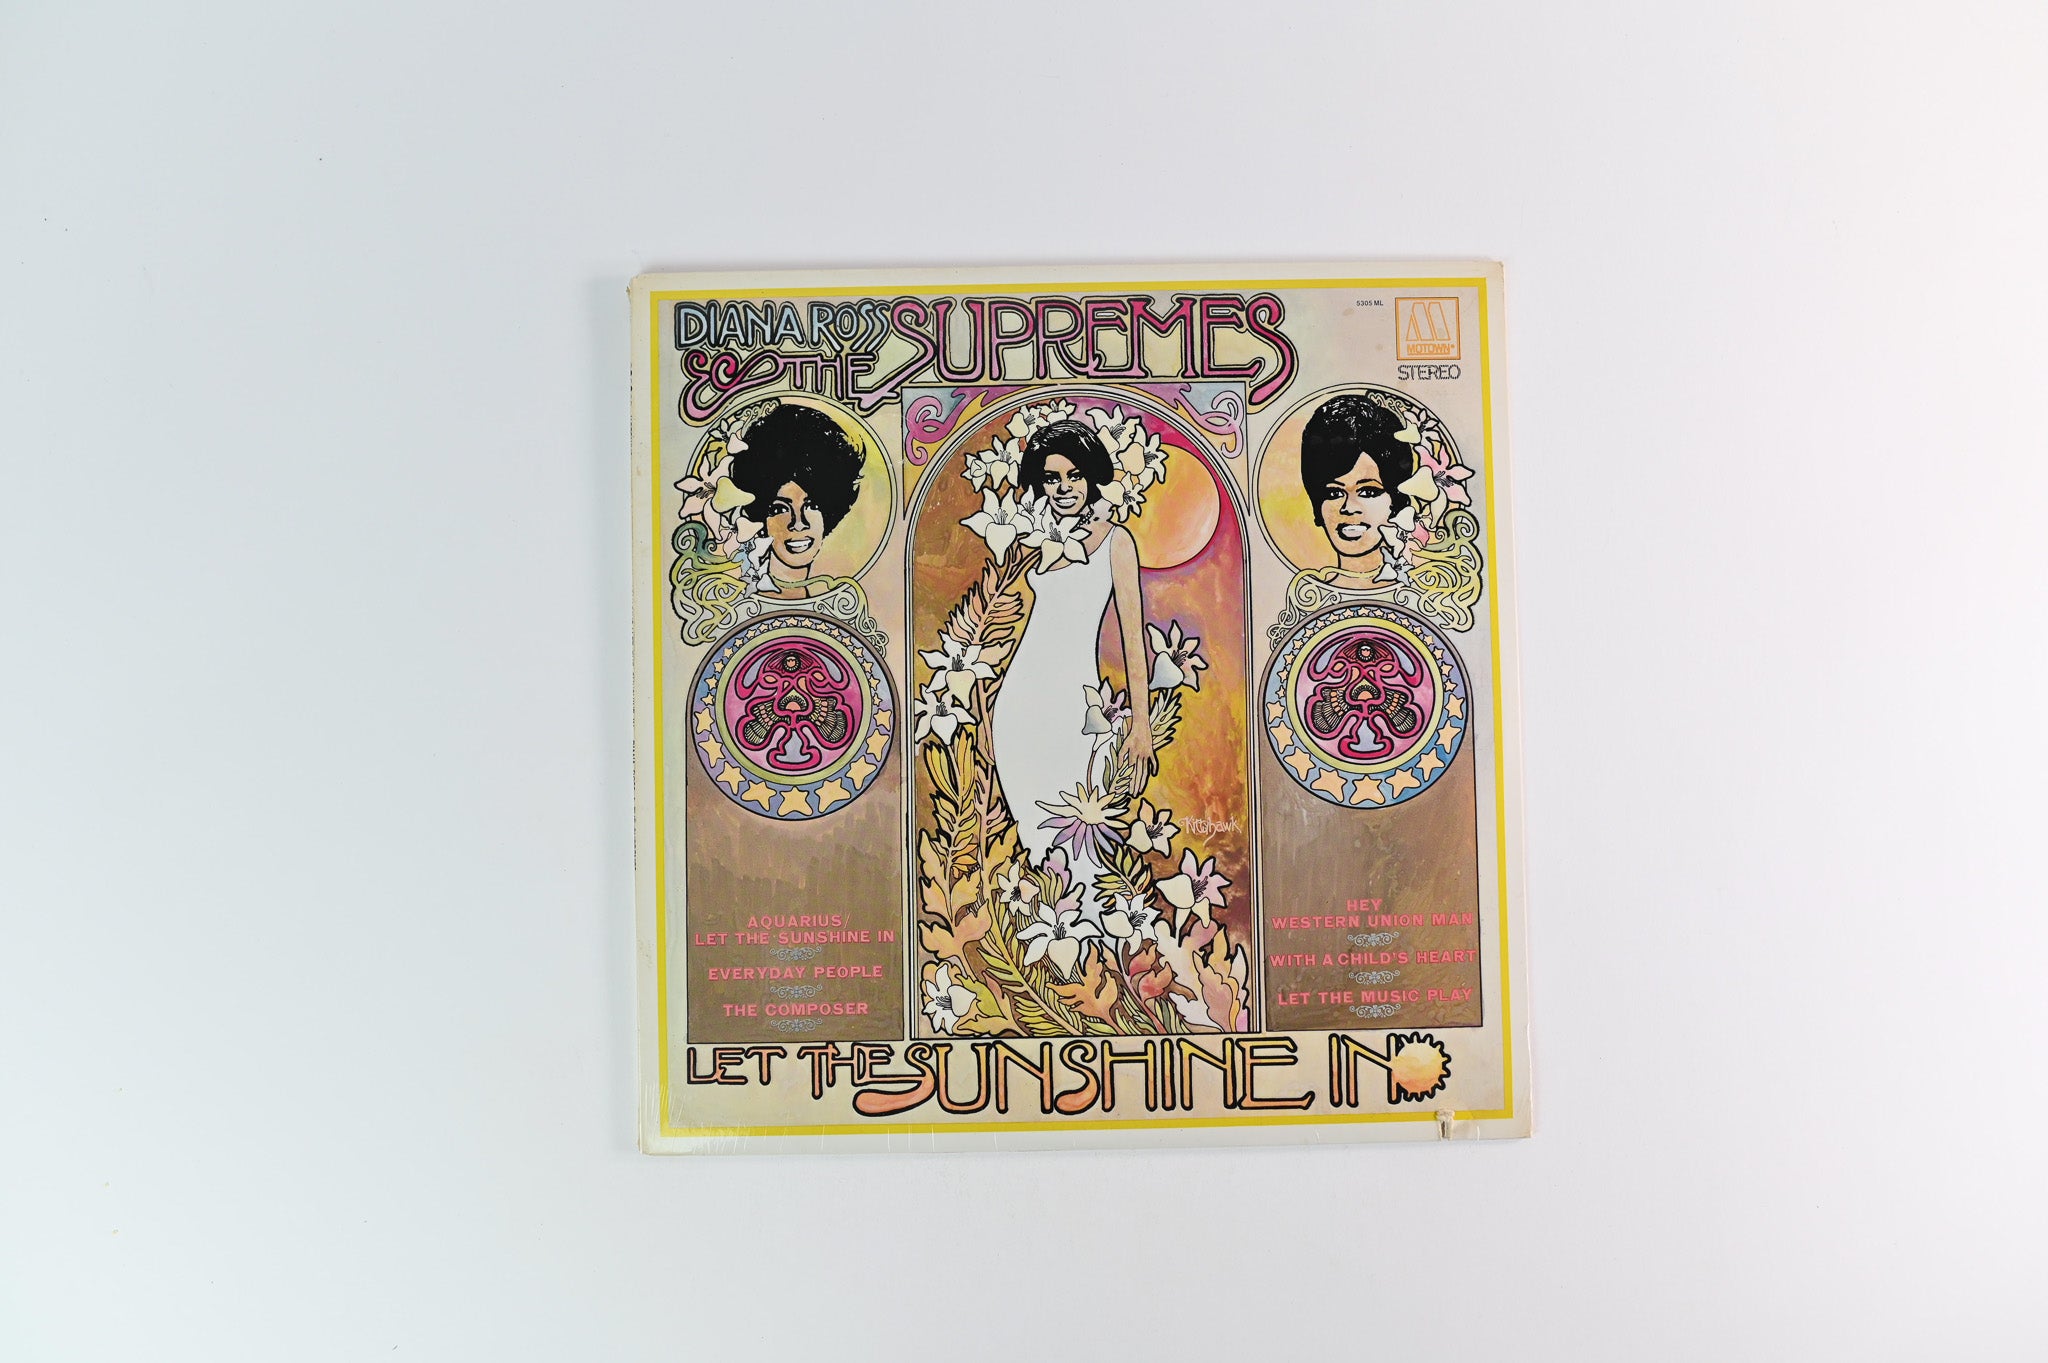 Diana Ross & The Supremes - Let The Sunshine In on Motown Sealed Reissue